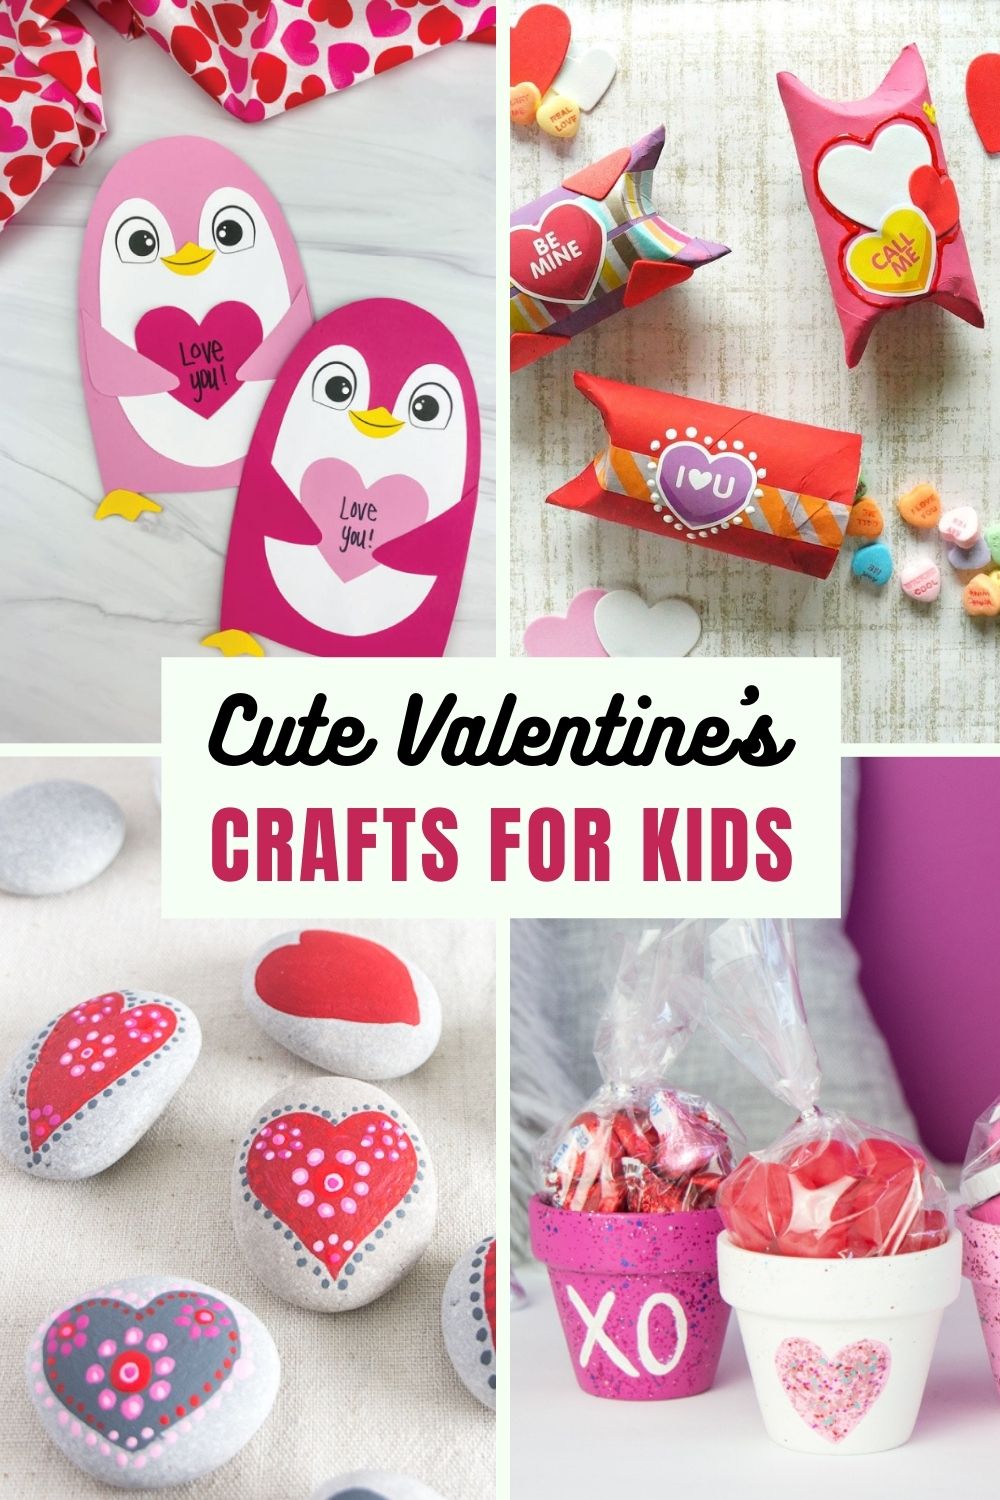 Cute Valentines Crafts for Kids